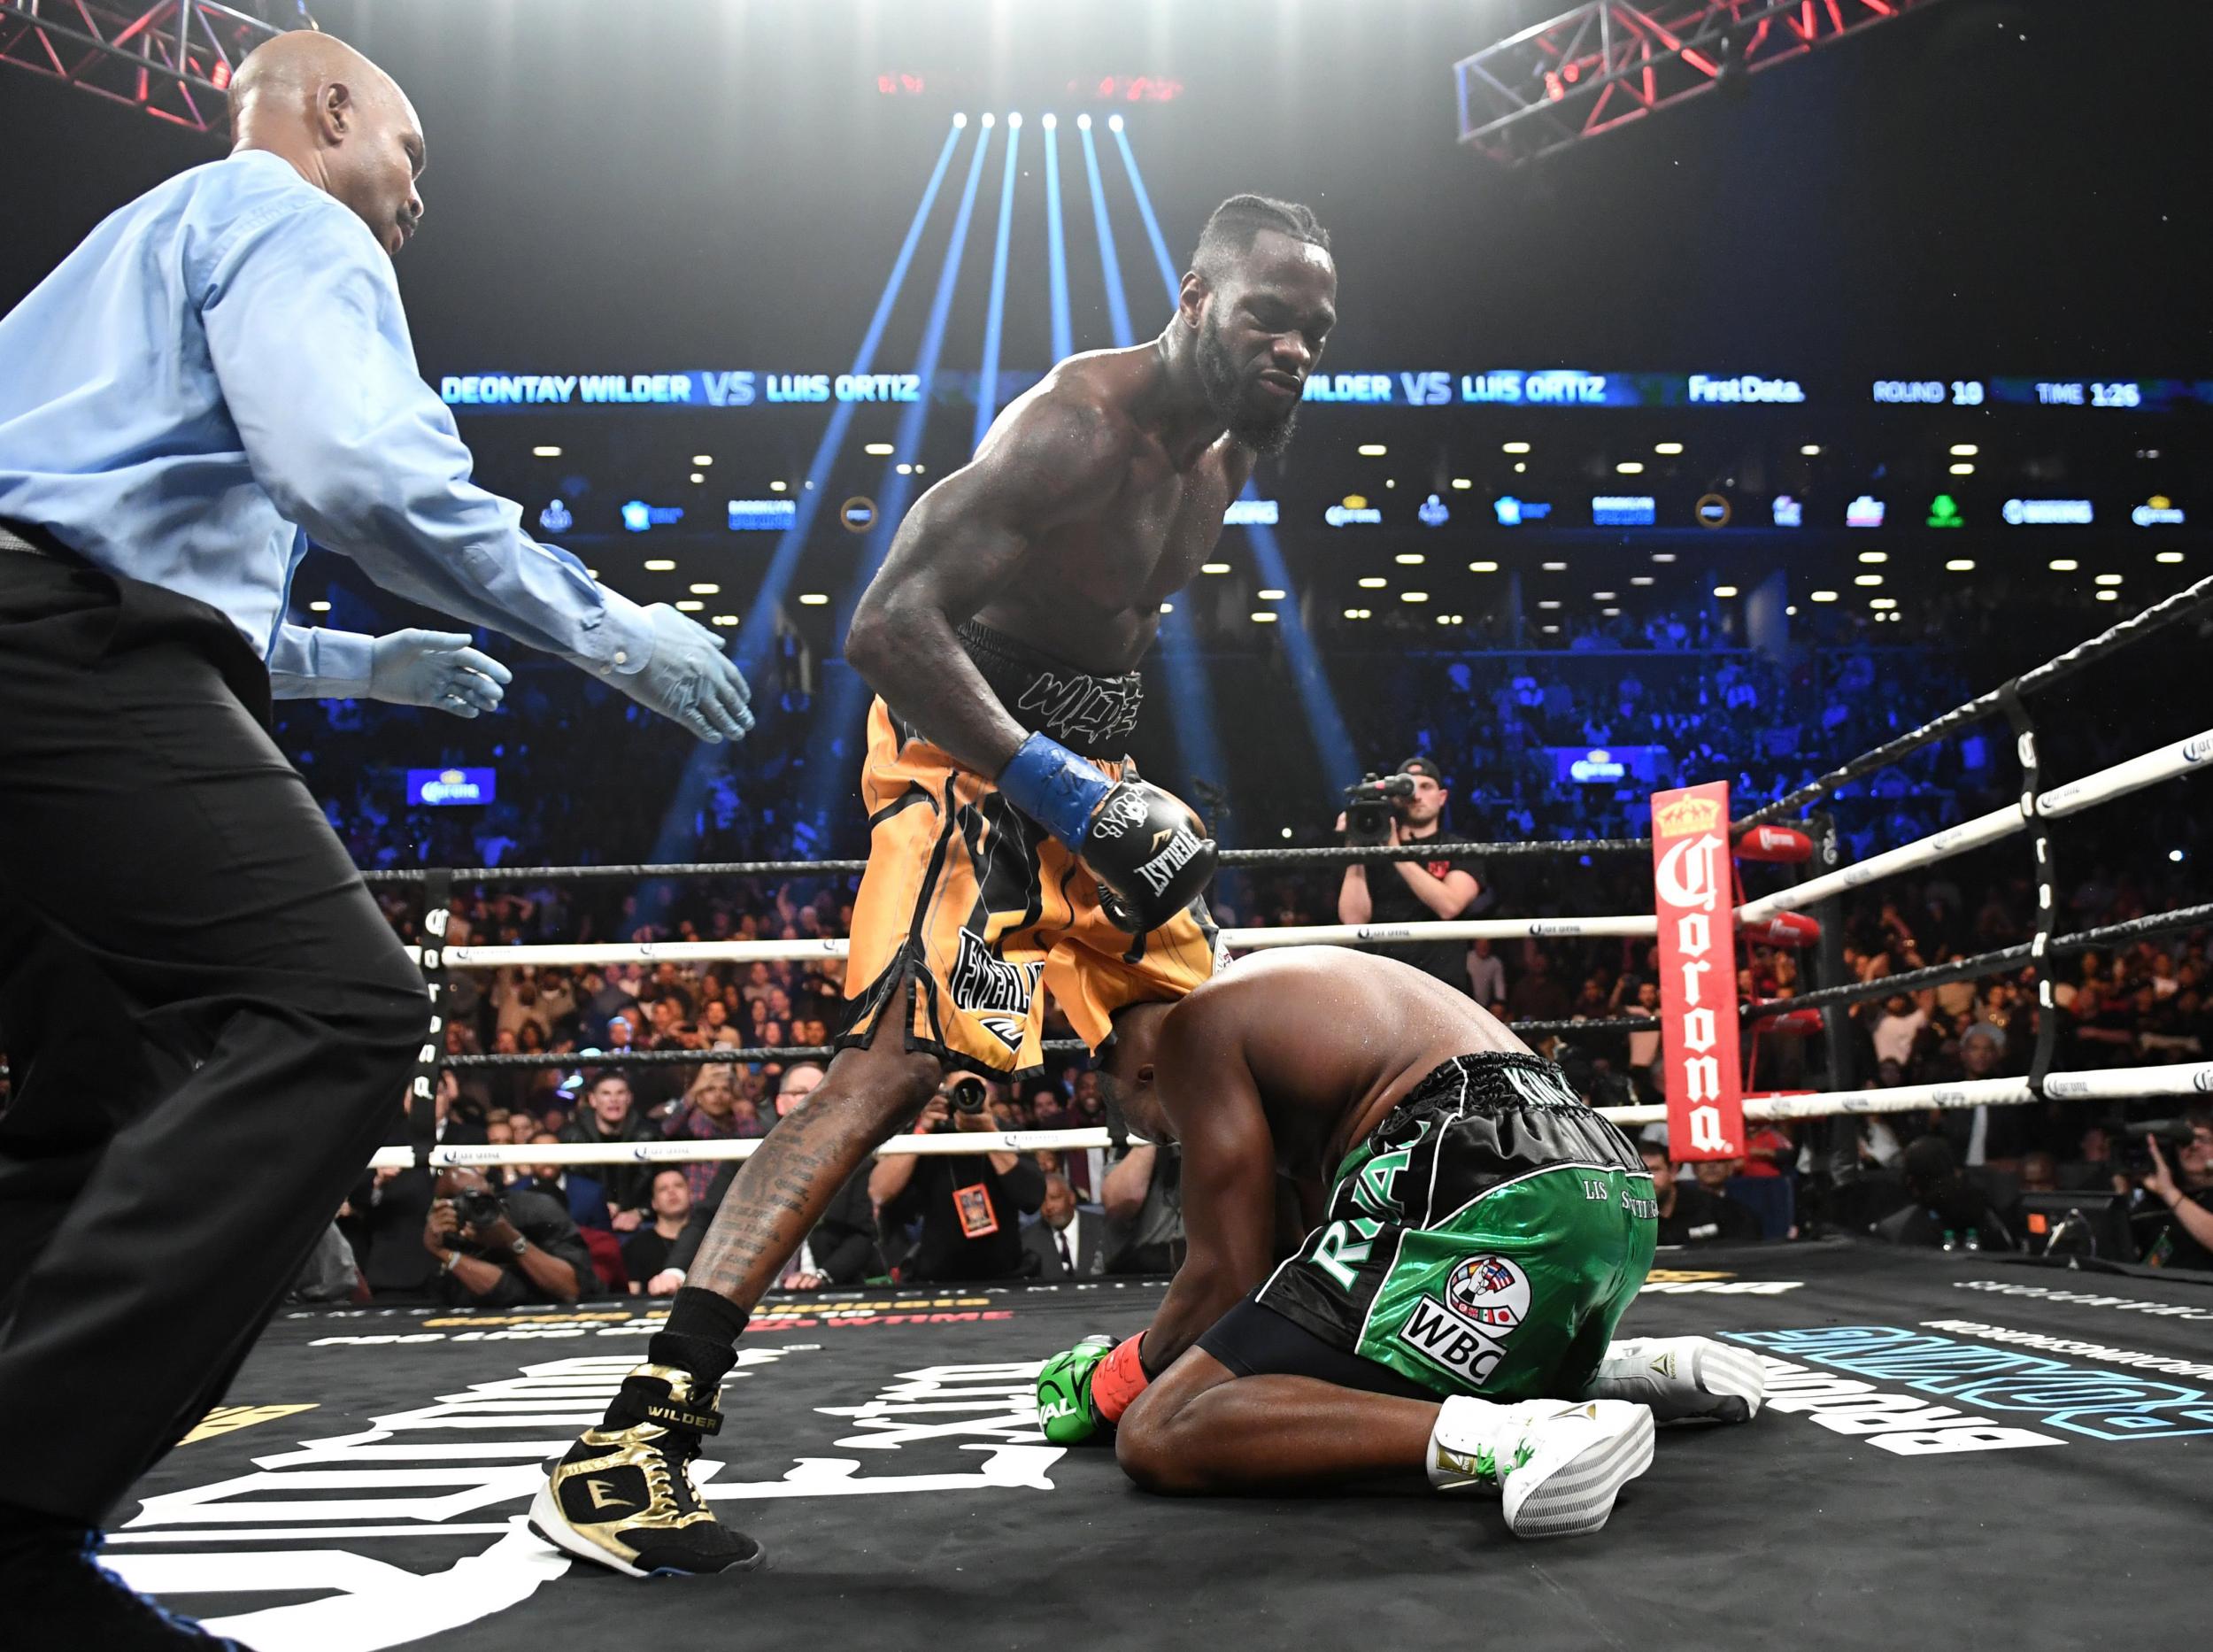 Ortiz was knocked out in the 10th round